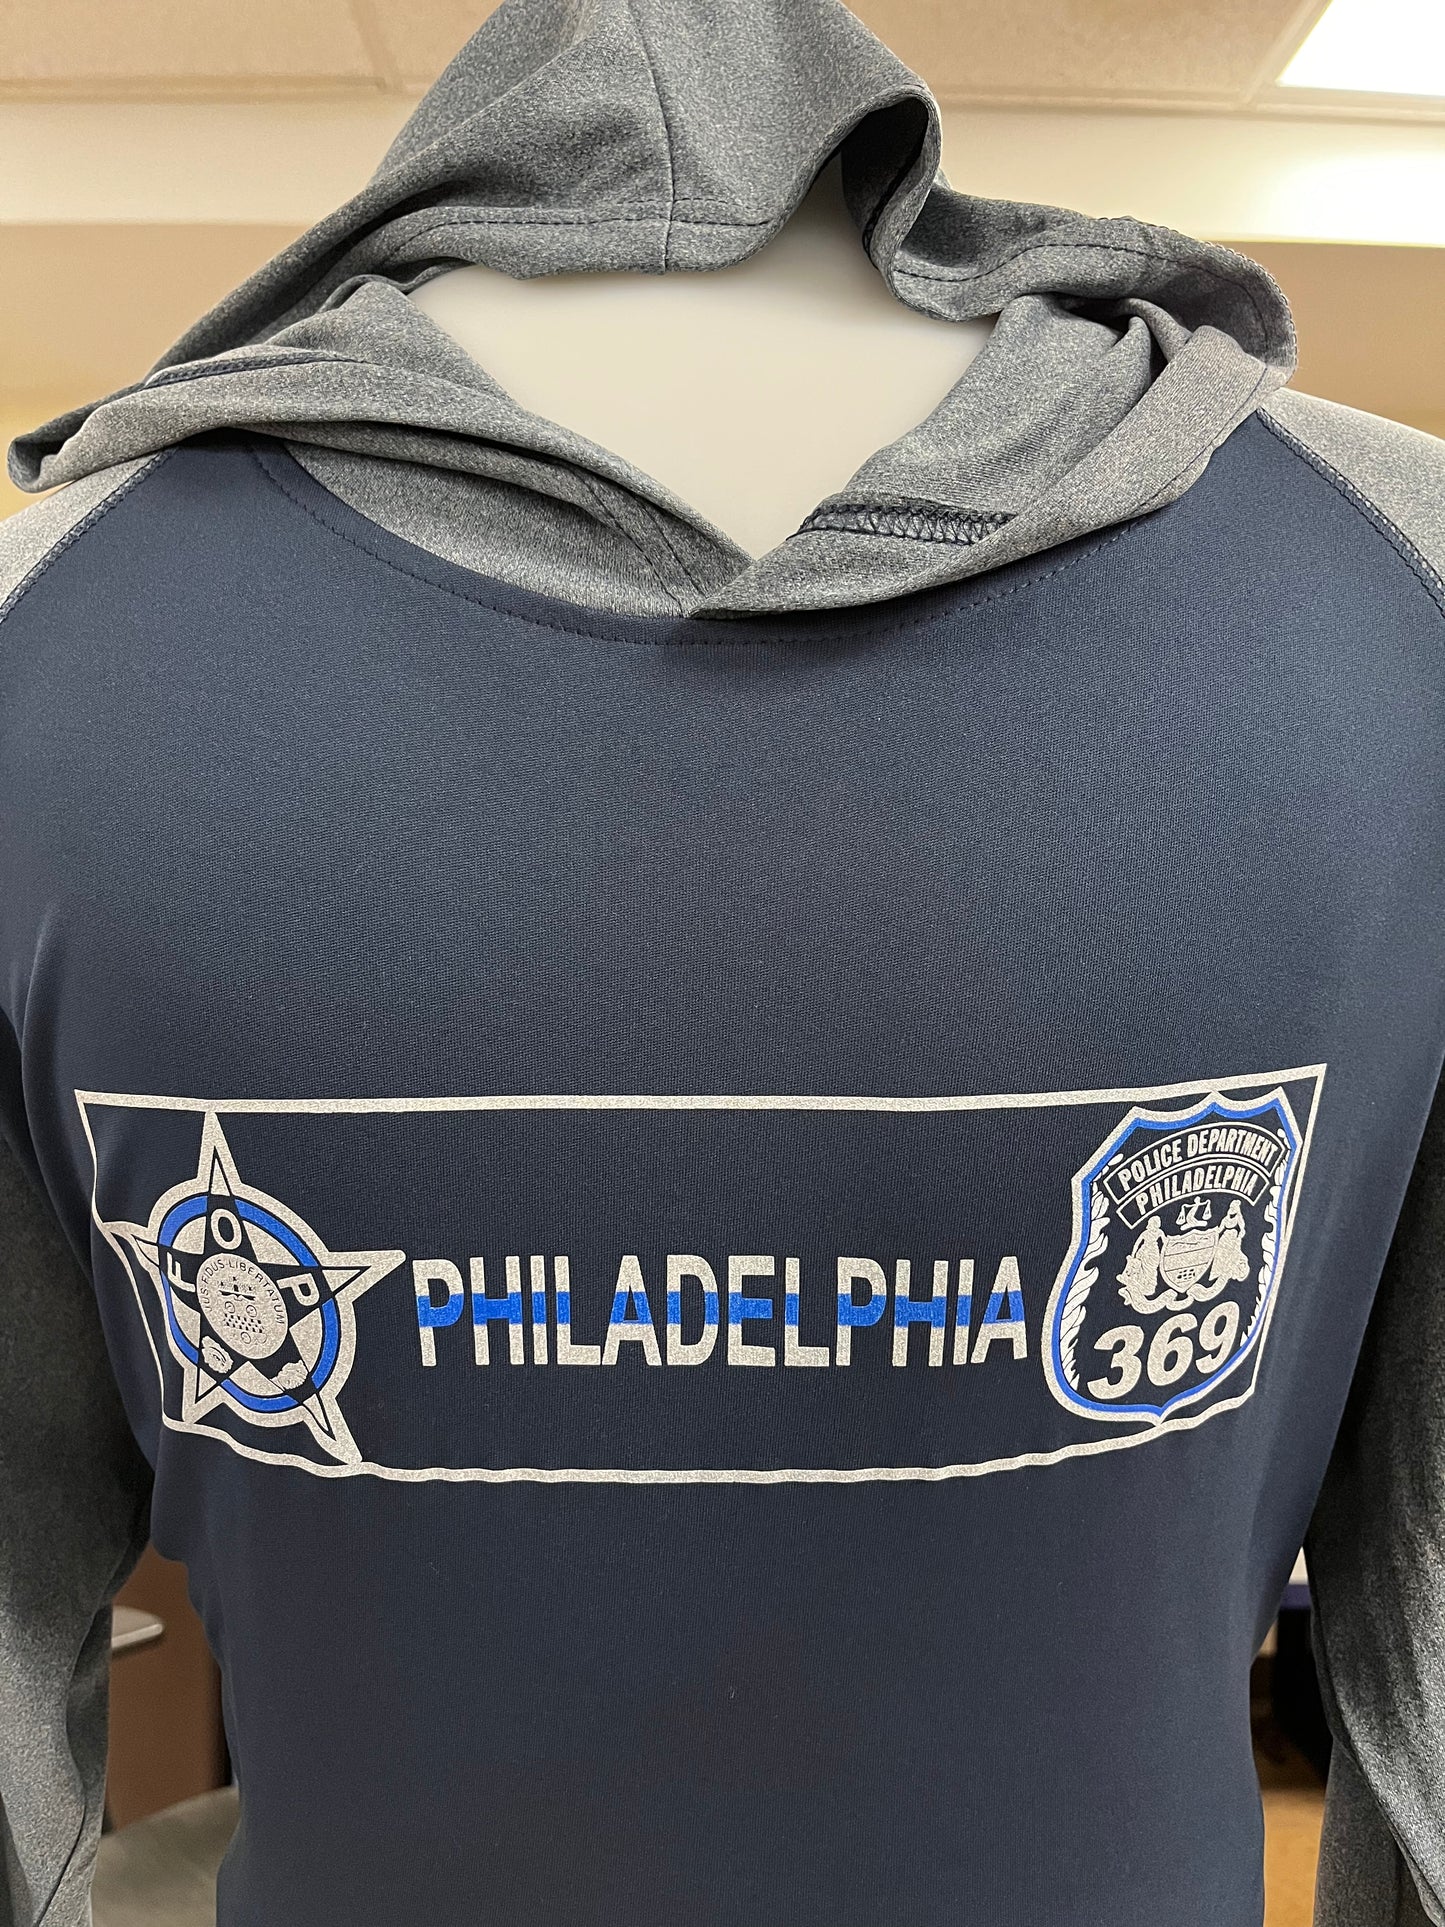 Long Sleeve Light Weight Dri-Fit with a Hood